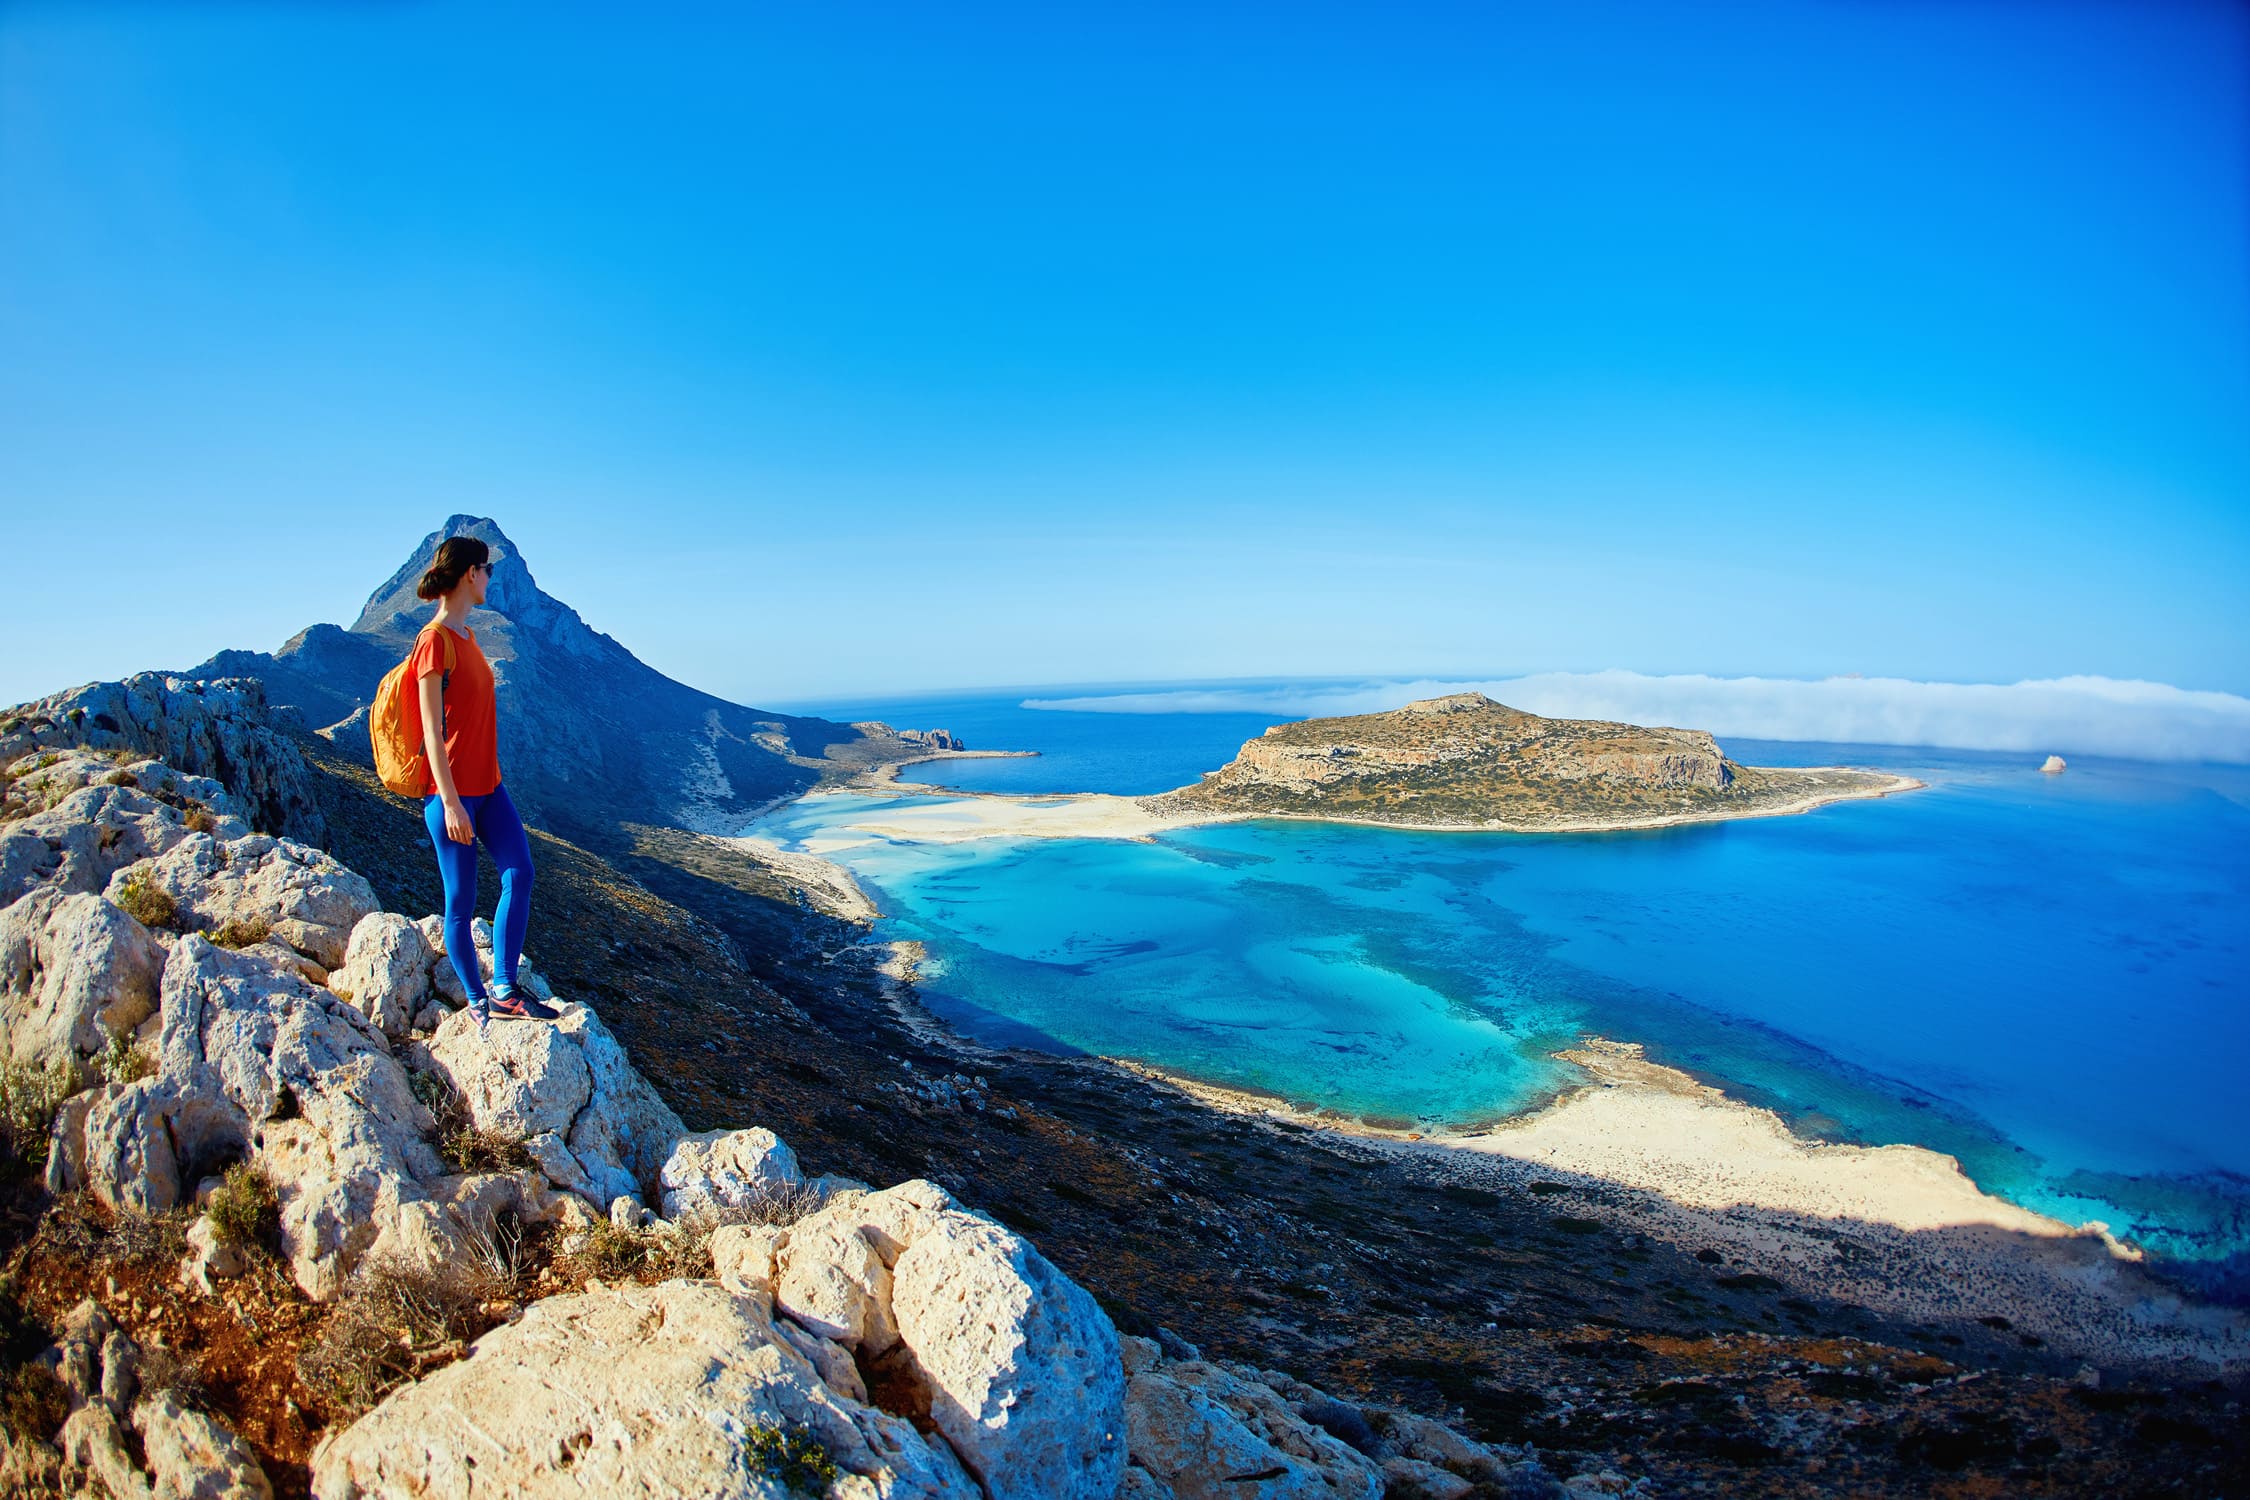 Cruise to Gramvousa and the Blue Lagoon of Balos